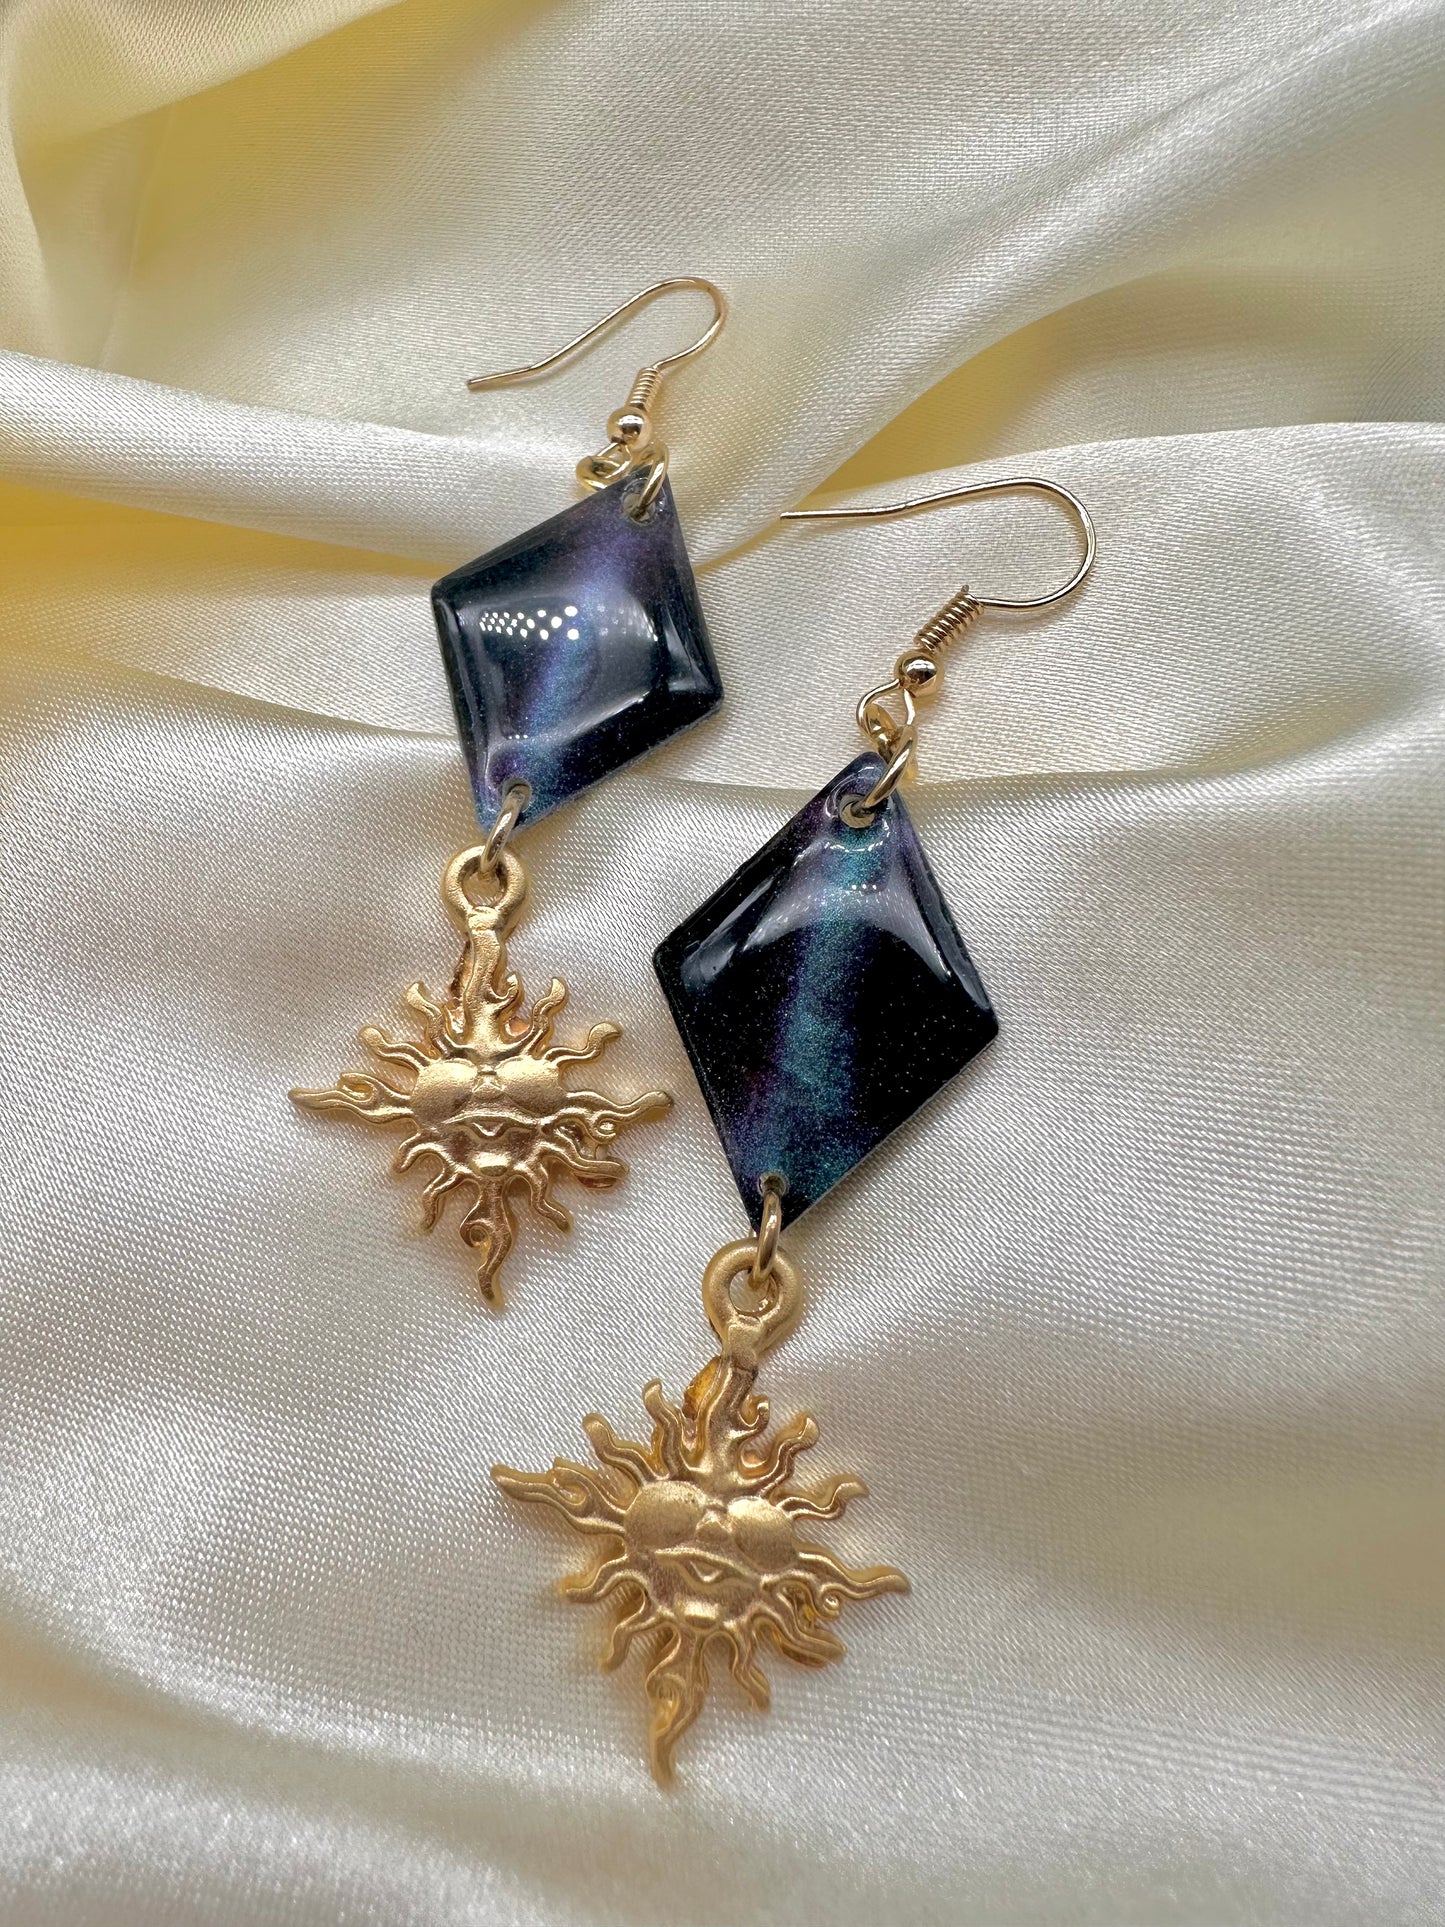 MILKYWAY - Earrings with 18k gold plated sun charm and handmade galaxy resin